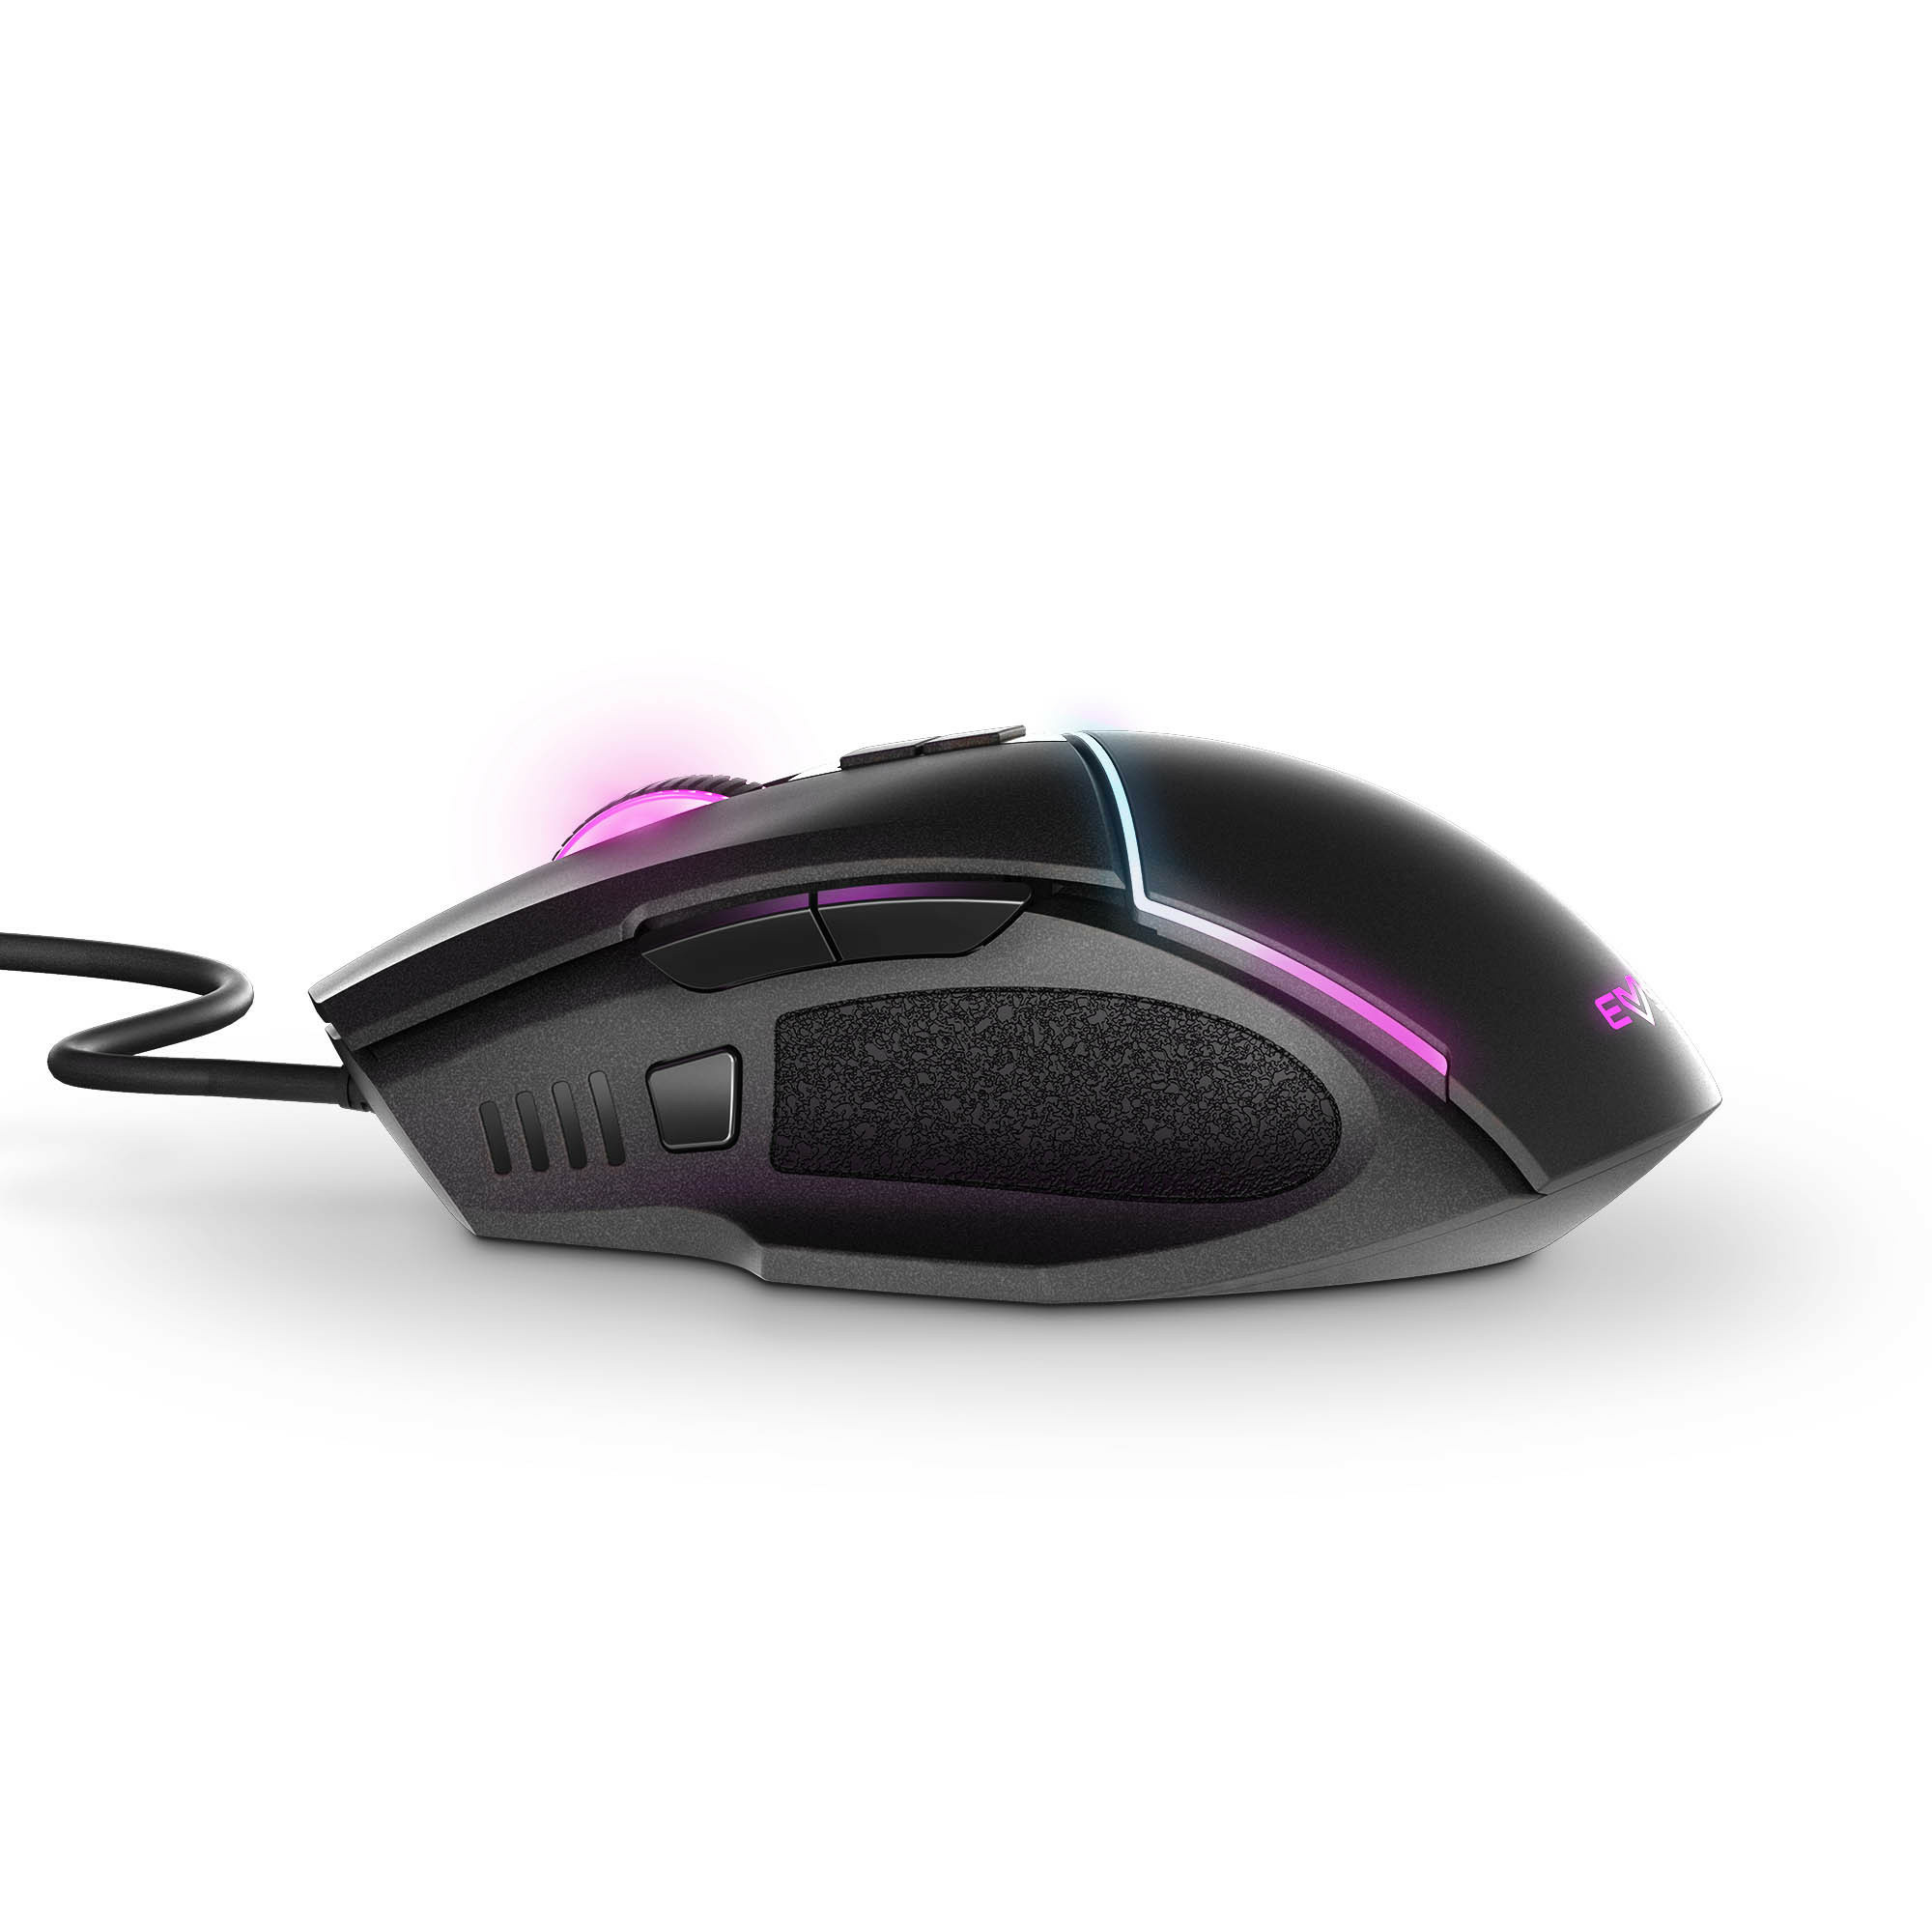 Mouse with buttons which can be programmed via software